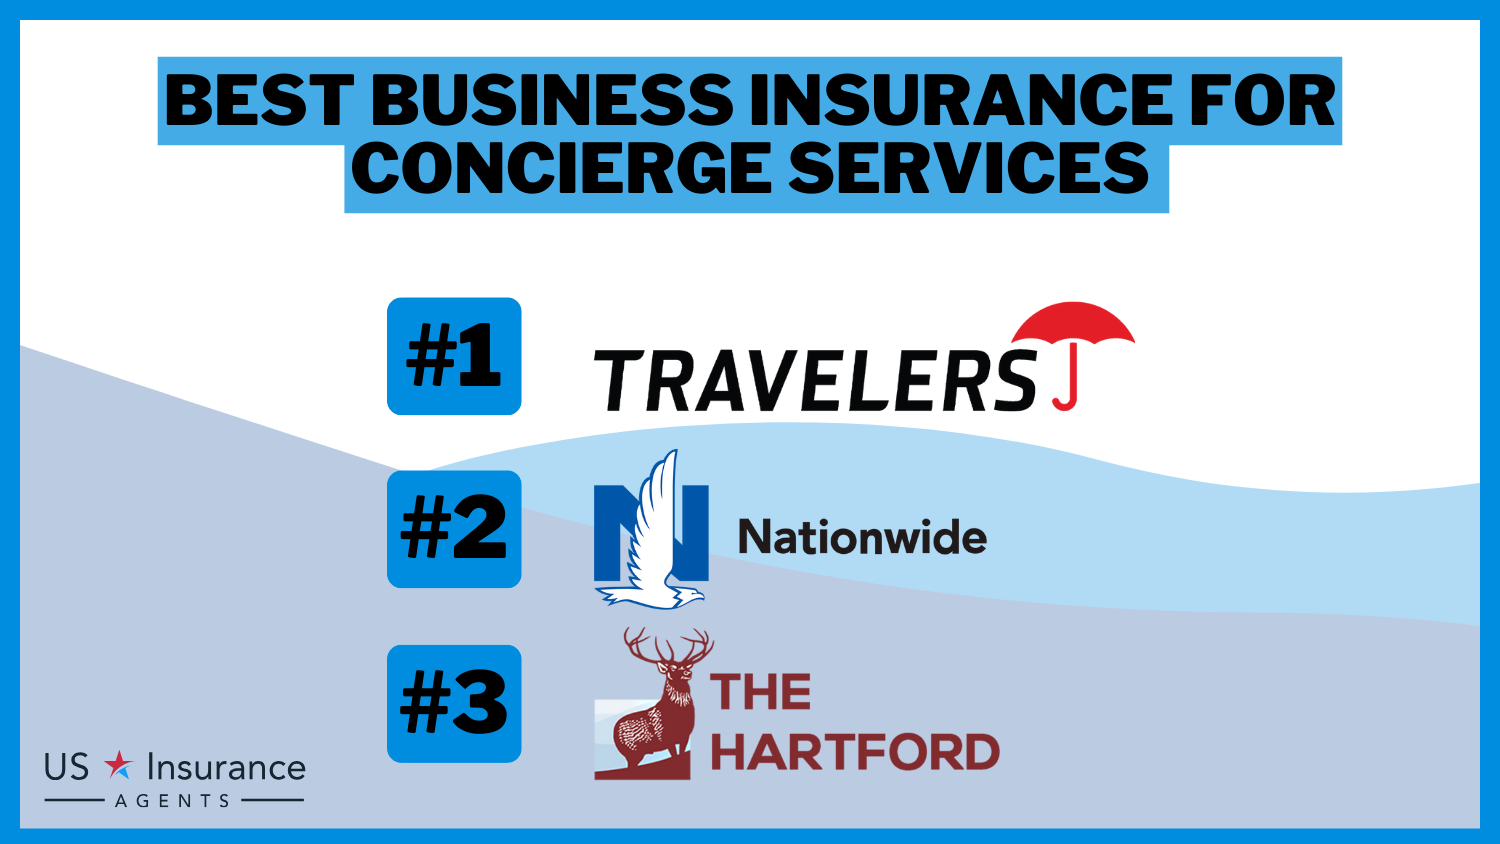 Travelers, Nationwide and The Hartford: Best Business Insurance For Concierge Services